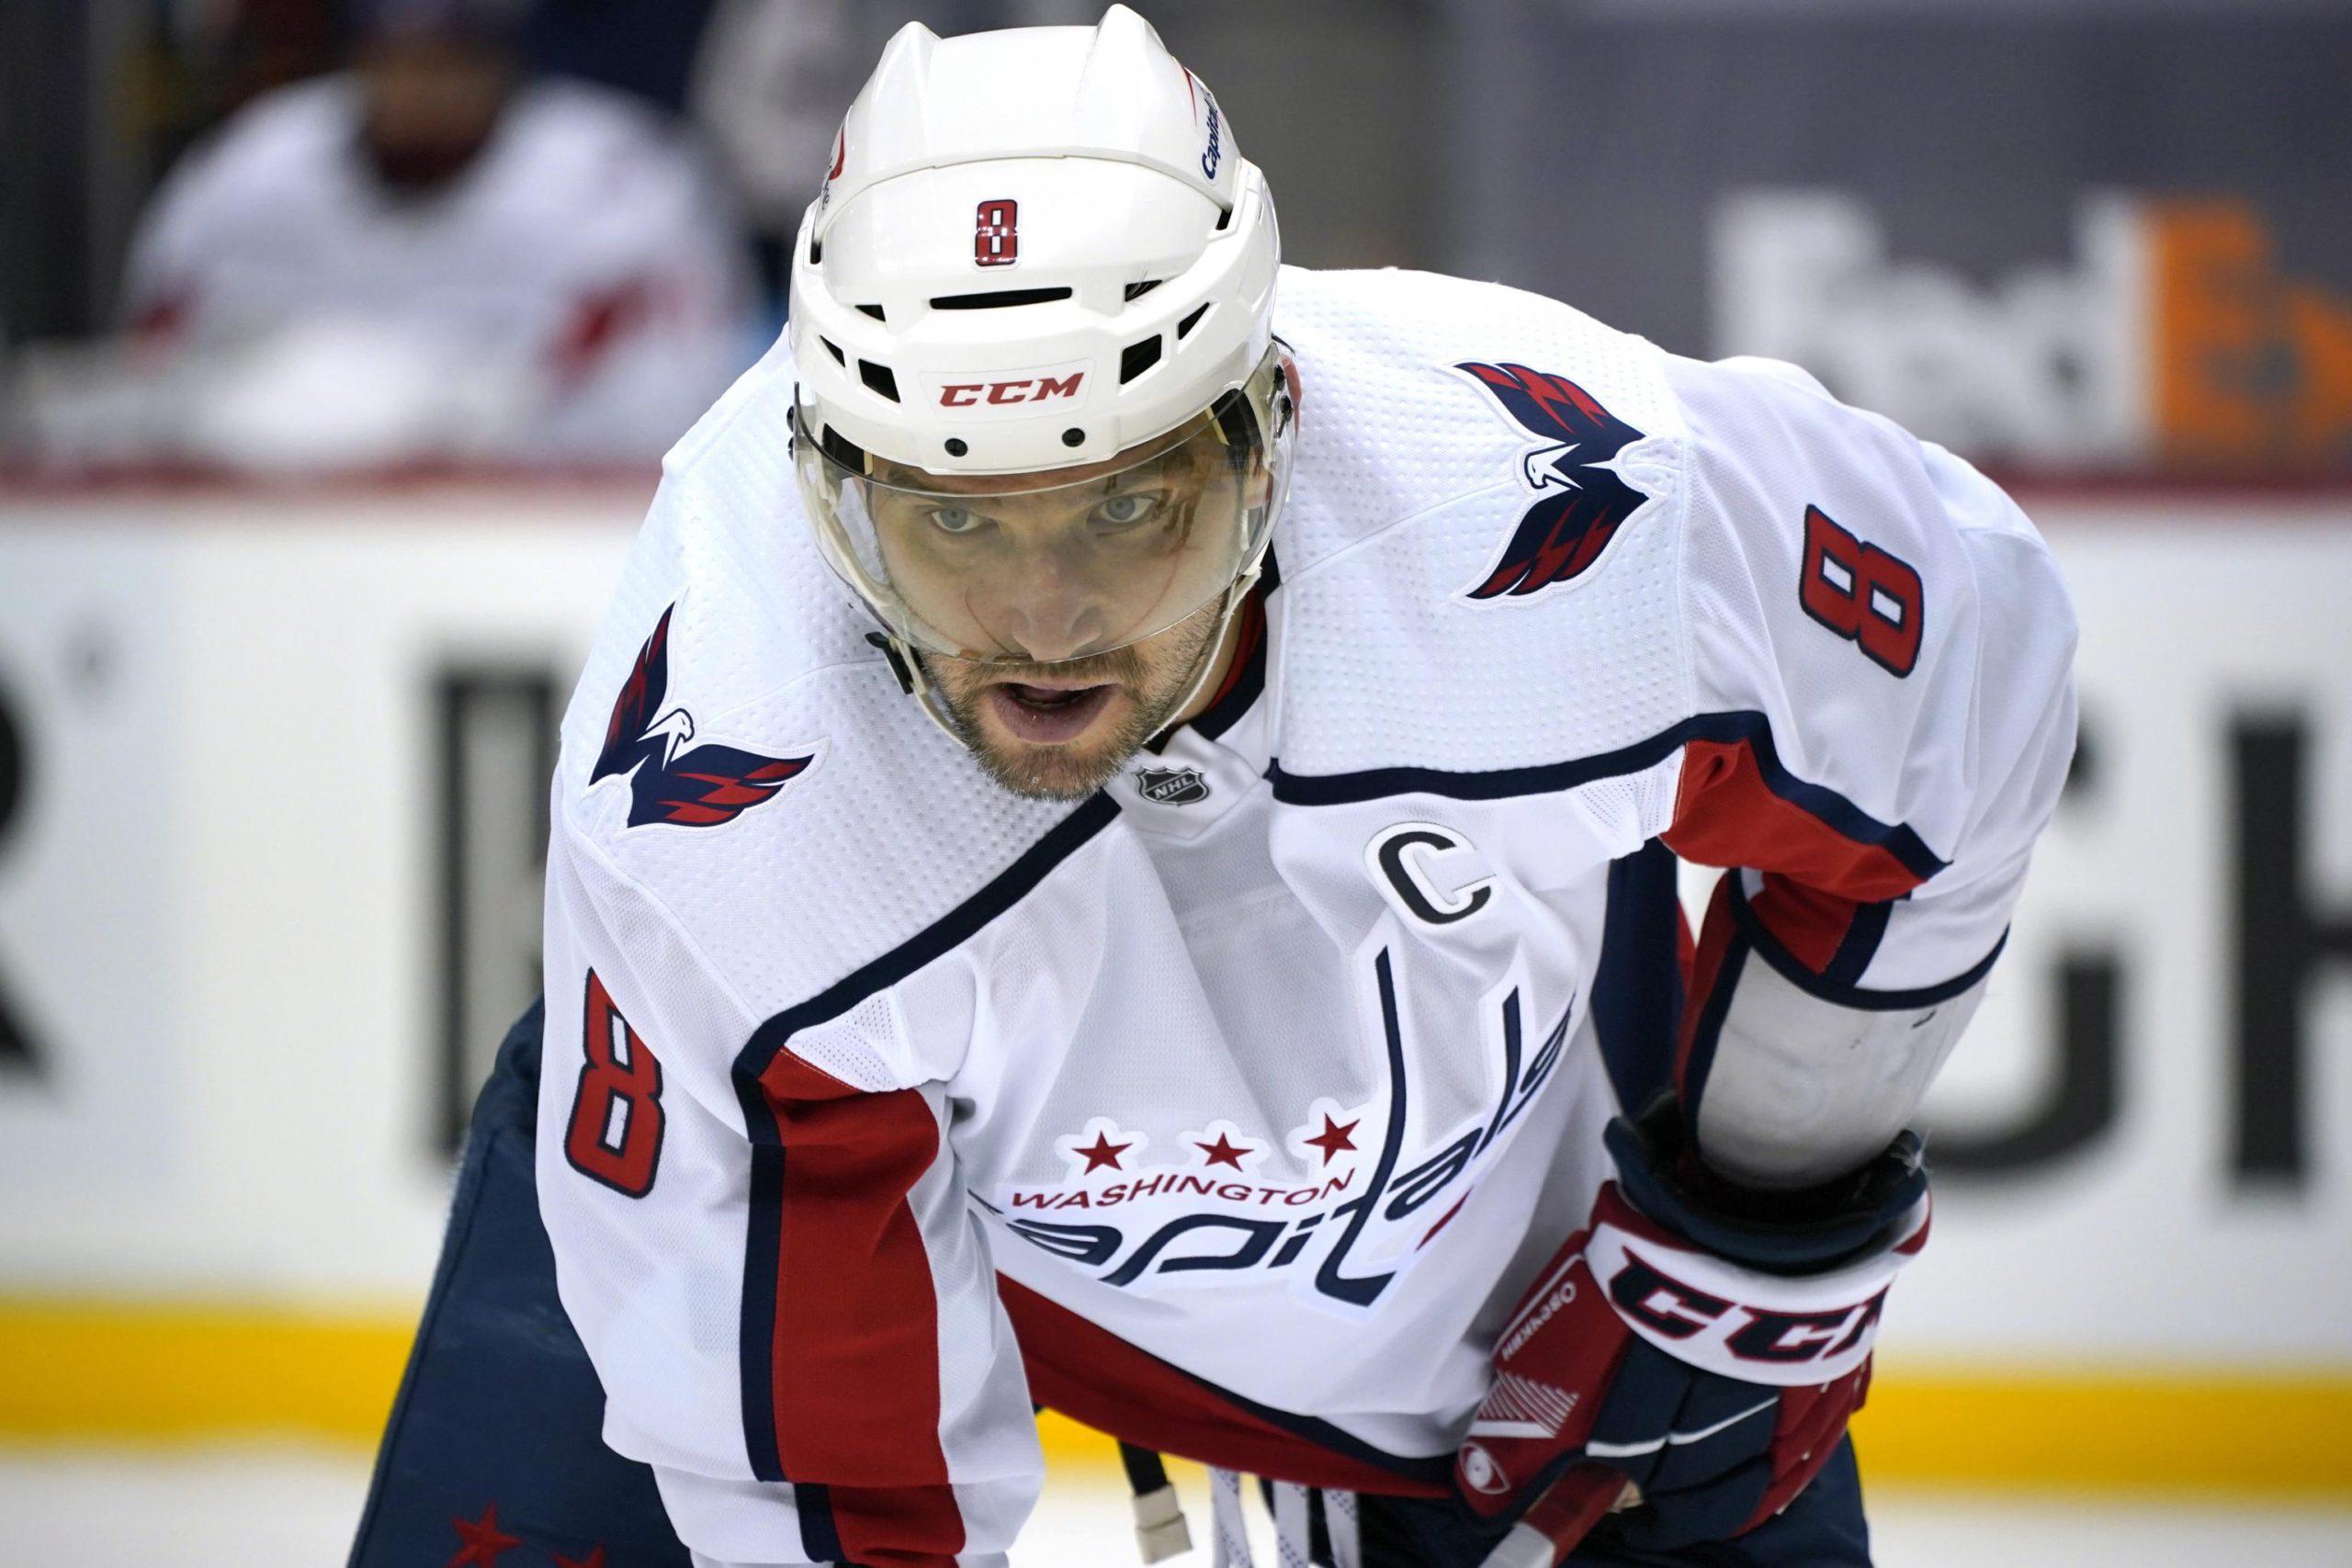 Alexander Ovechkin, Three Other Capitals Players Set to Miss at Least Four Games for Violating COVID-19 Protocols